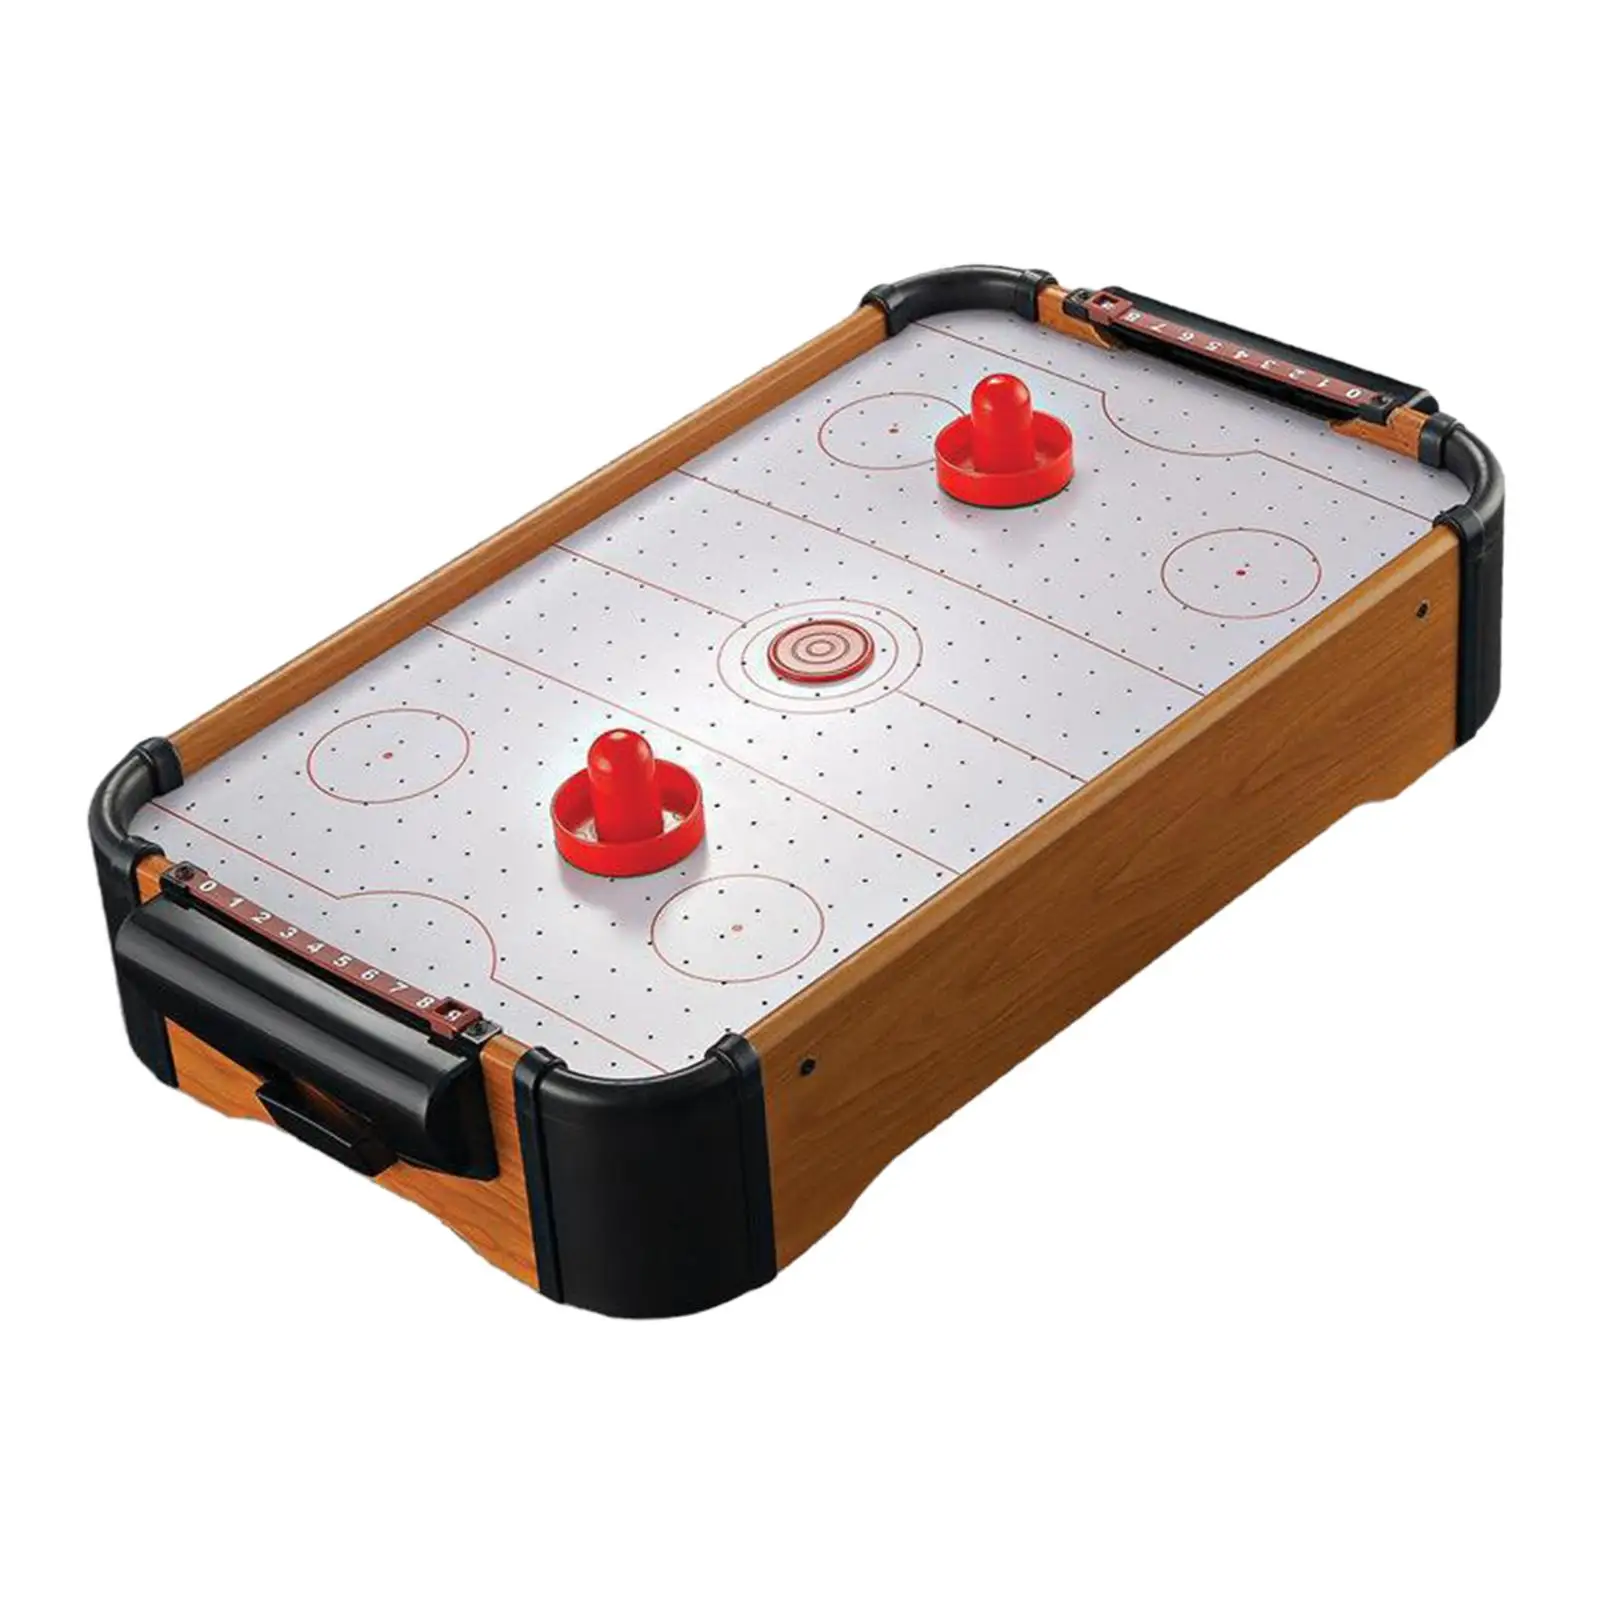 Cute Hockey Game Set Party Tabletop Interactive Family Game Two Players Play Football Board Table top Hockey for Adults Kids